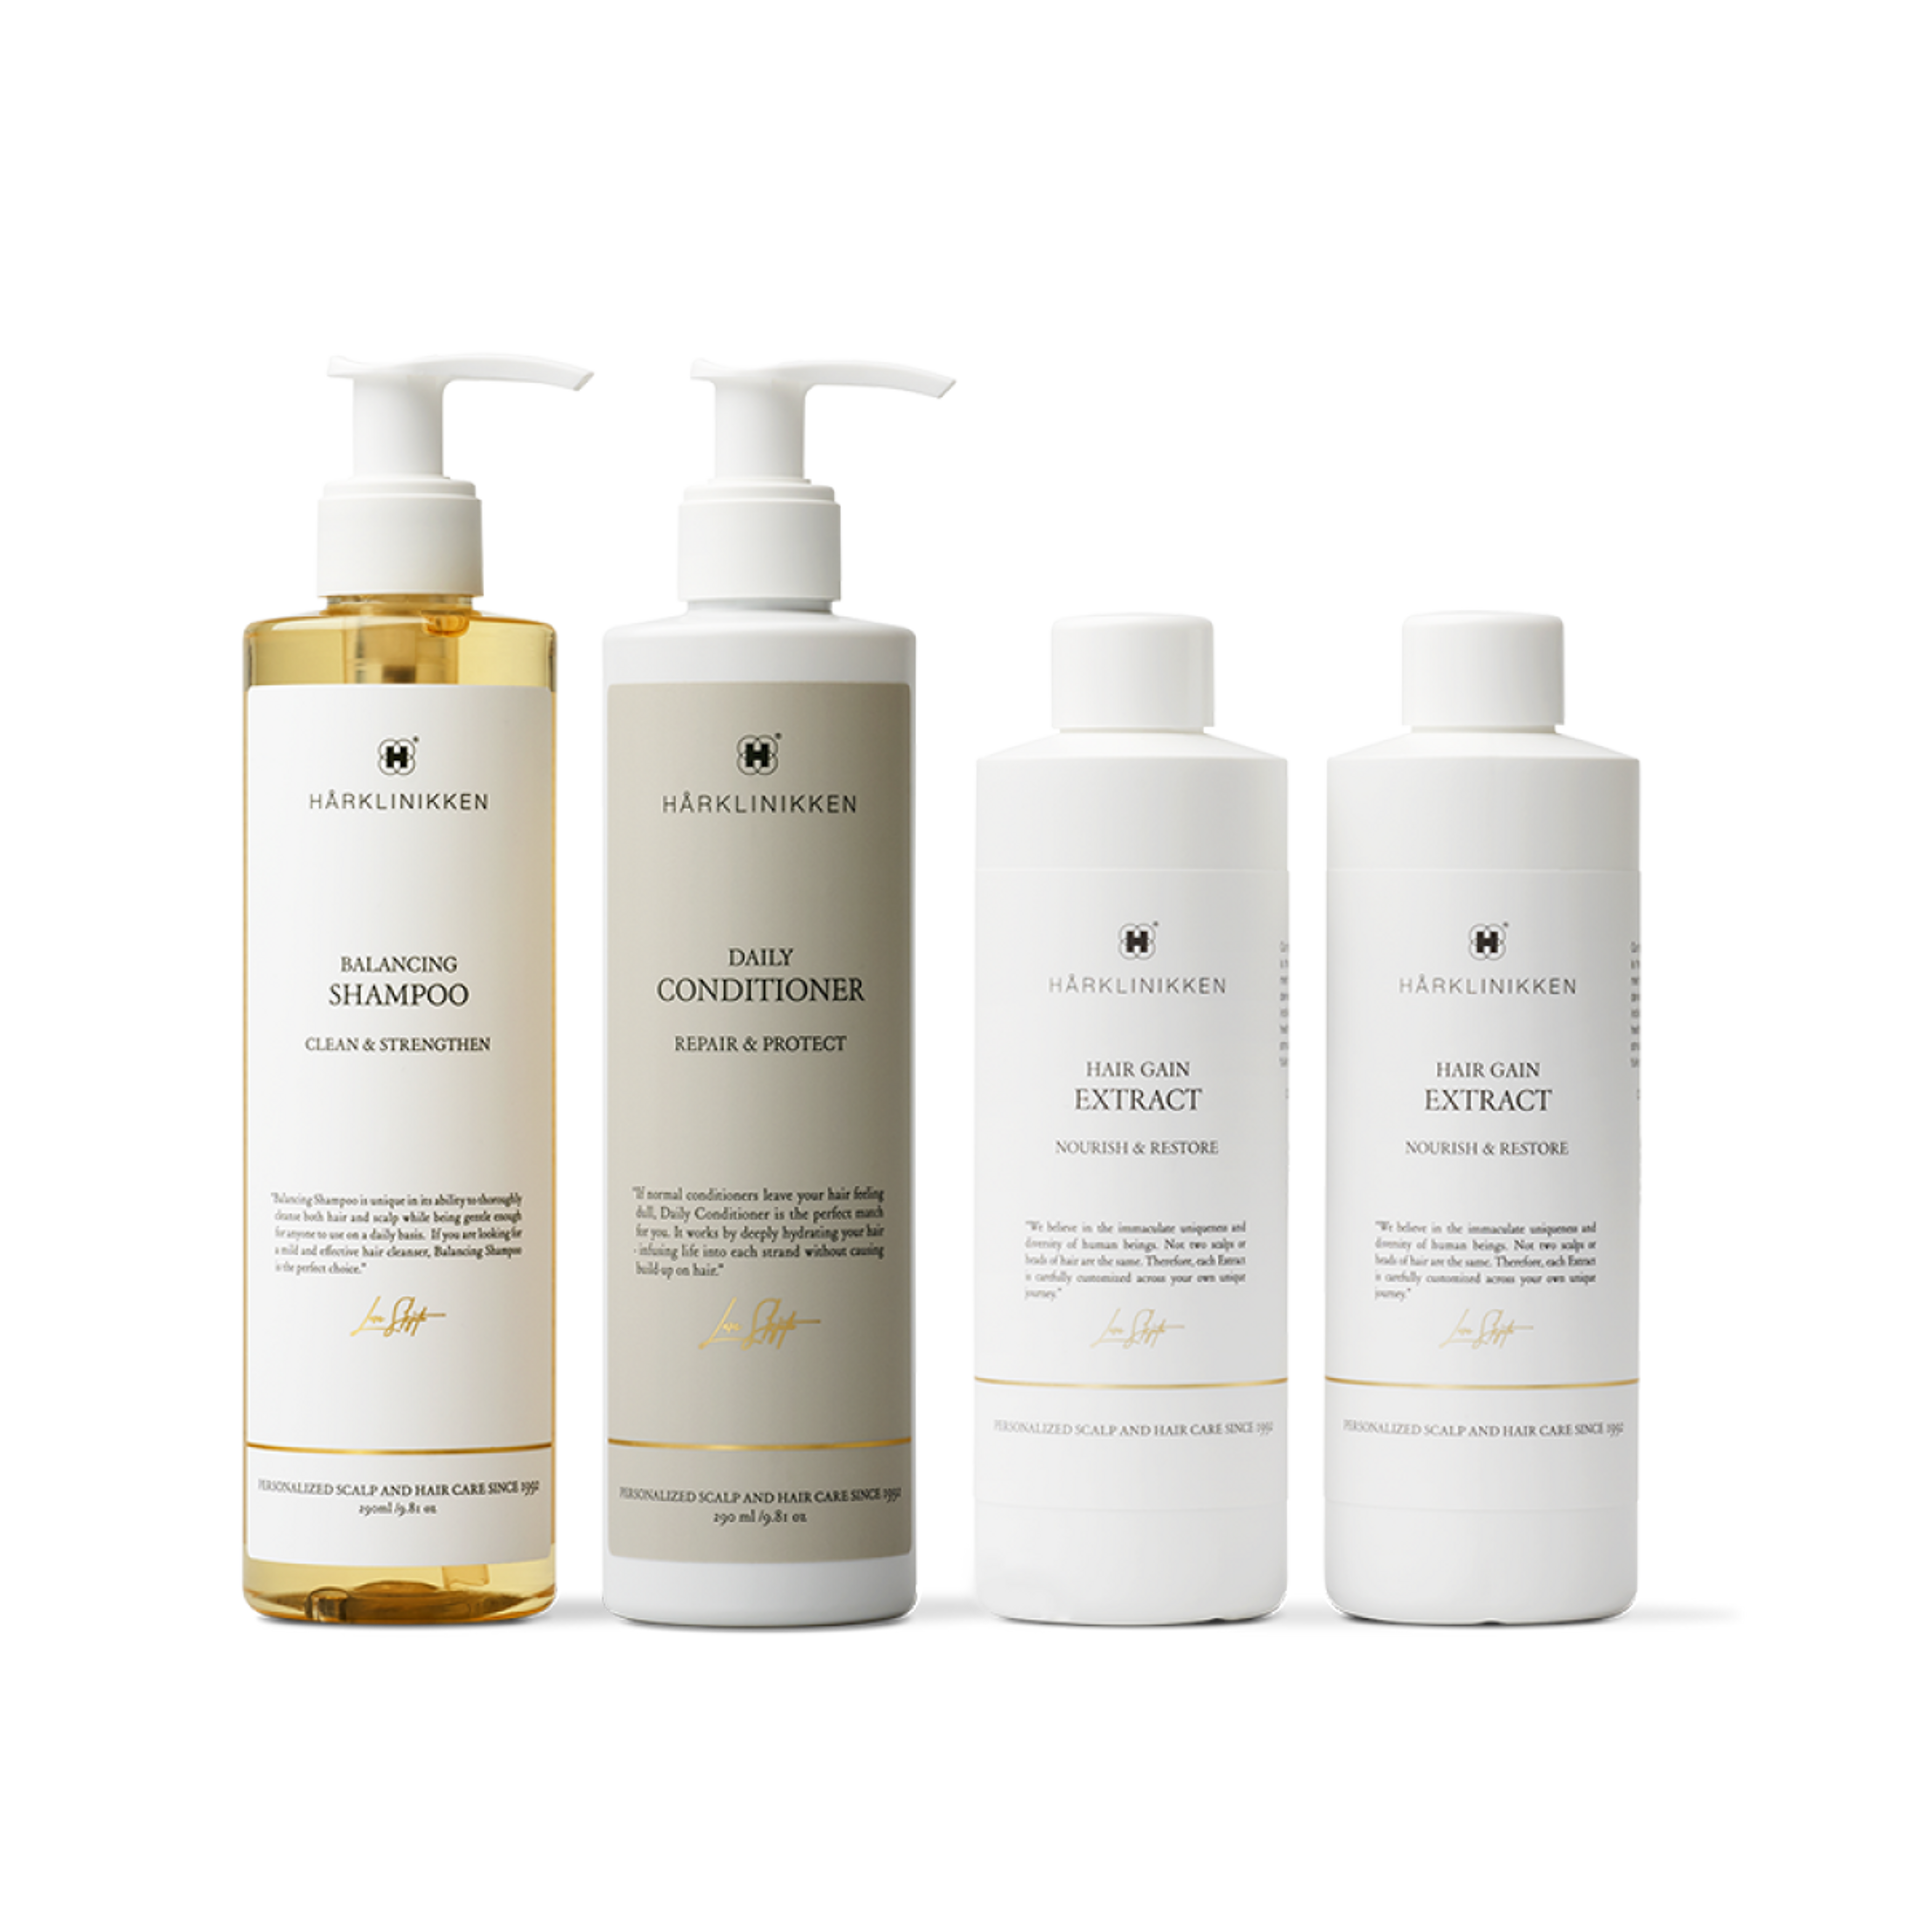 Harklinikken Membership Set 1 with two Hair Gain Extracts, Balancing Shampoo and Daily Conditioner